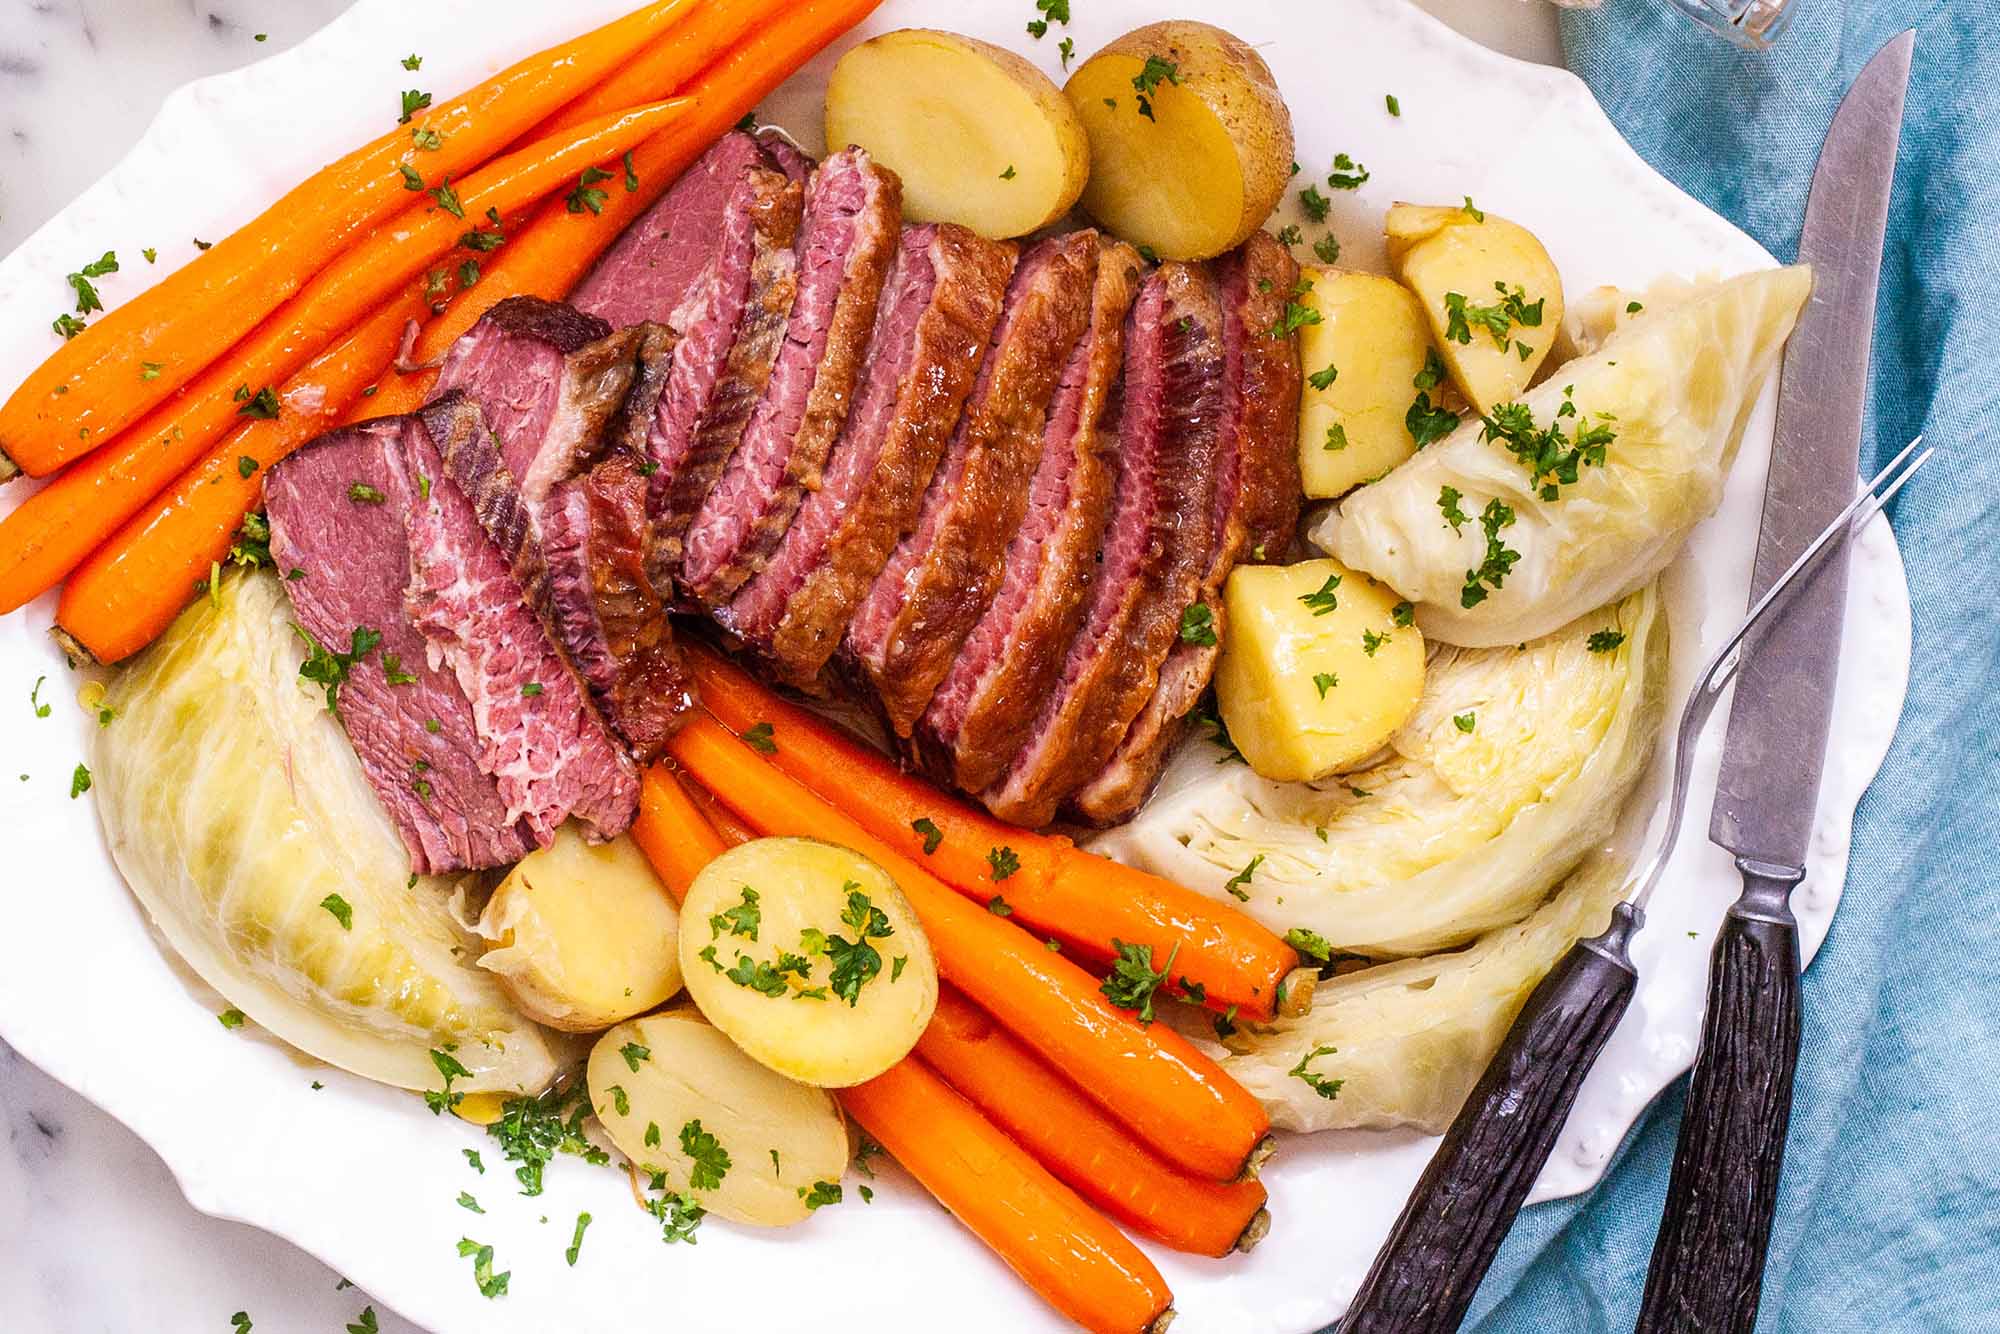 Best Boiled Corned Beef and Cabbage Recipe - platter of sliced corned beef, carrots, potatoes, and cabbage sprinkled with herbs